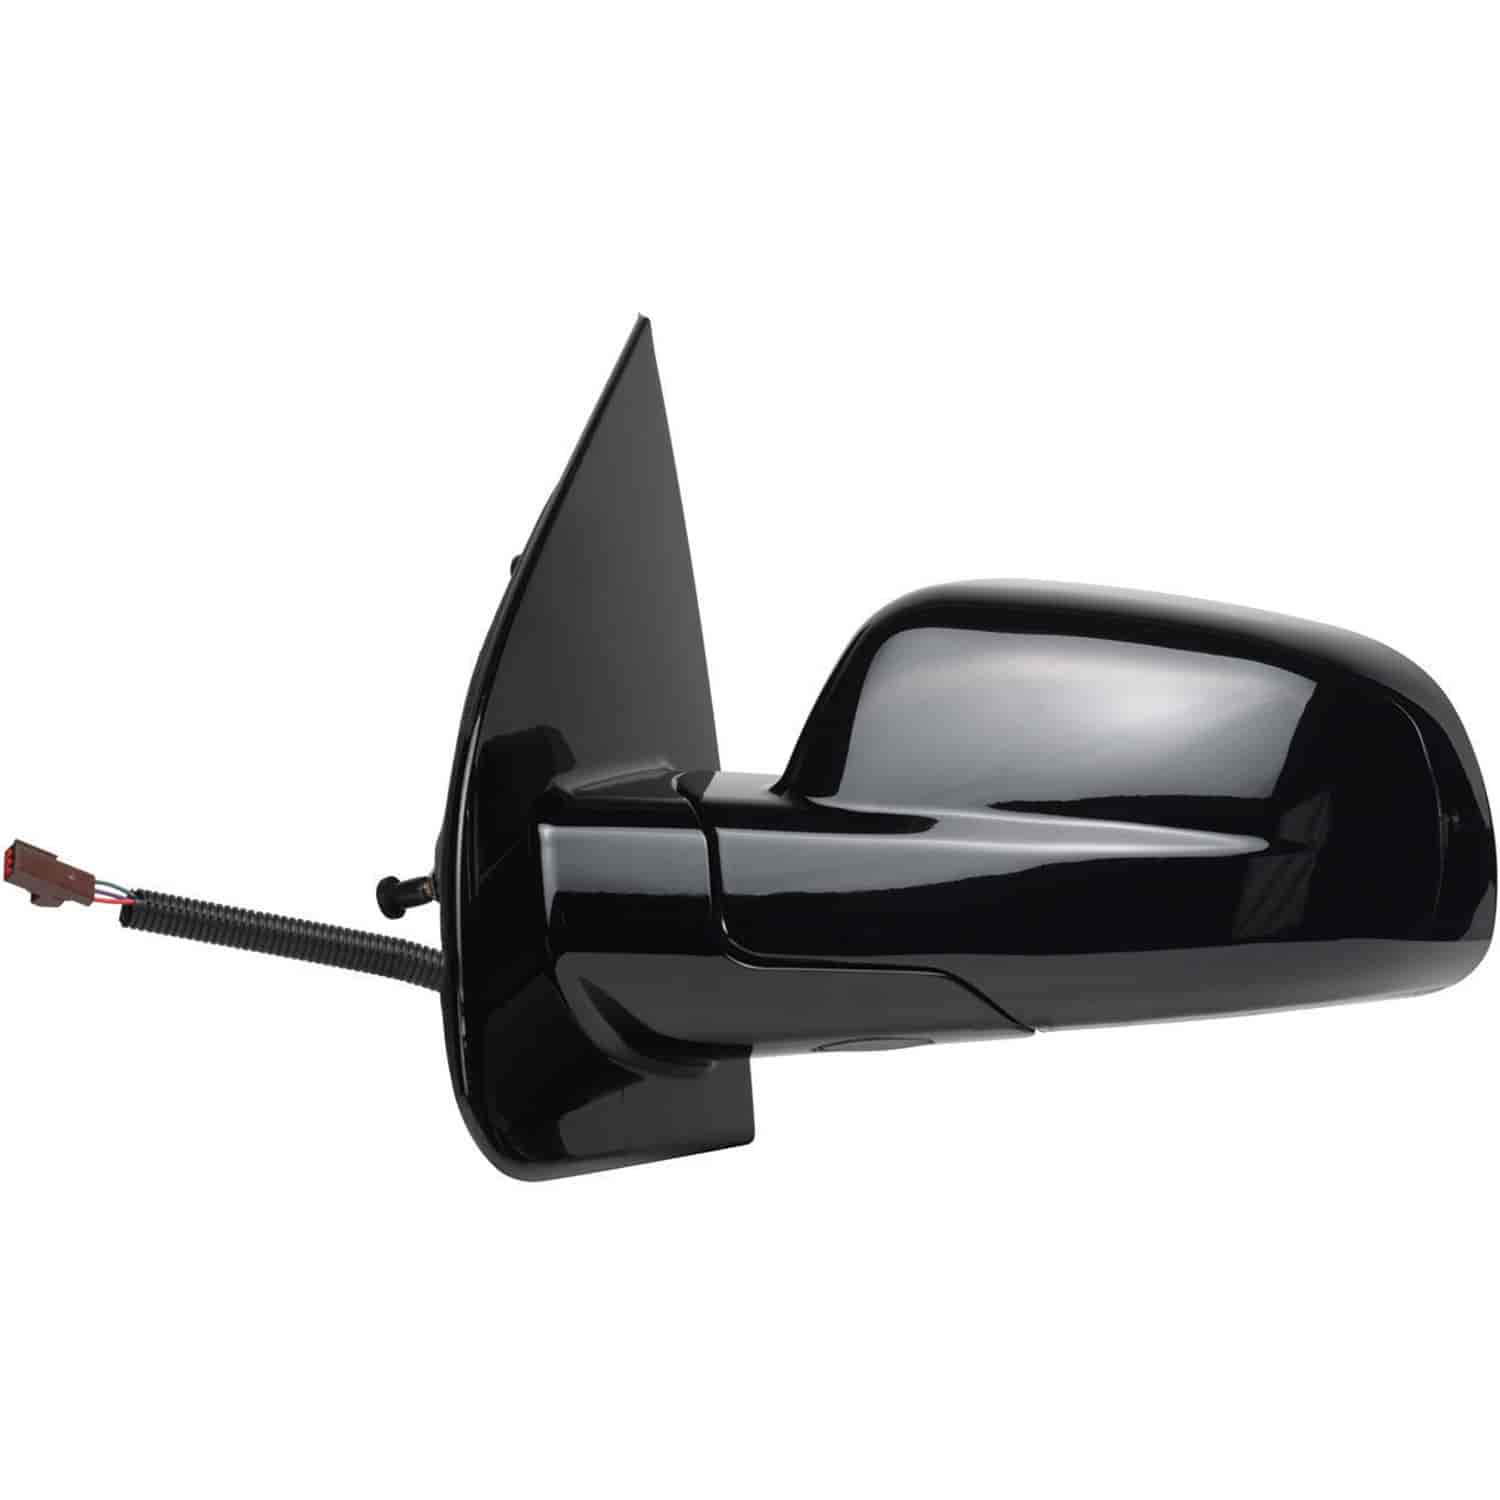 OEM Style Replacement mirror for 04-05 Ford Freestar w/o signal driver side mirror tested to fit and